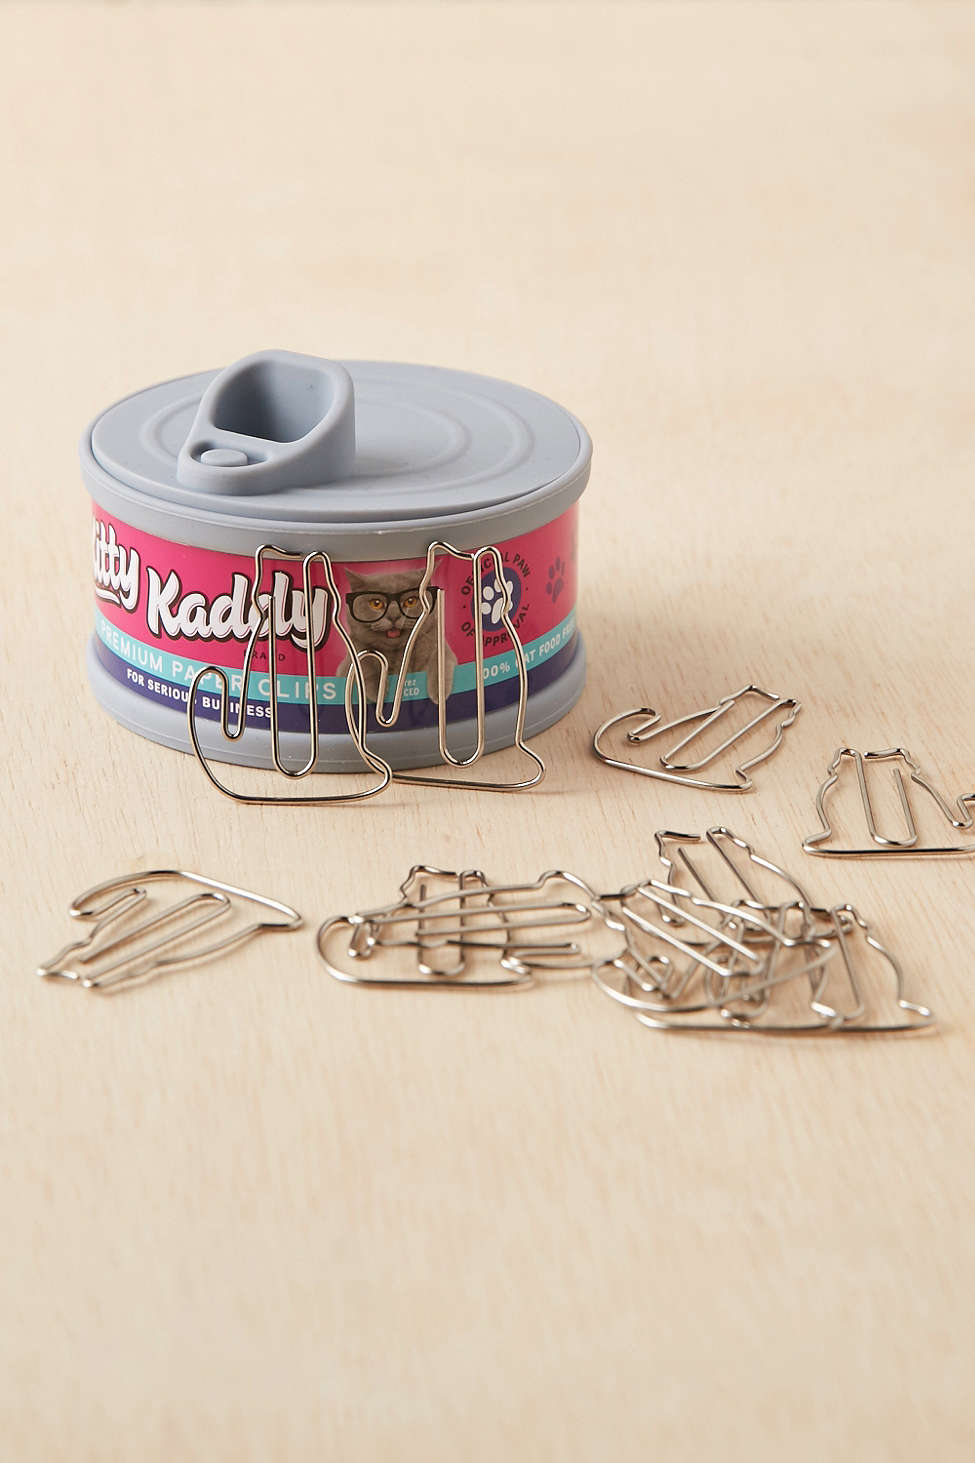 A Kitty Kaddy cat food can that stores paper clips.